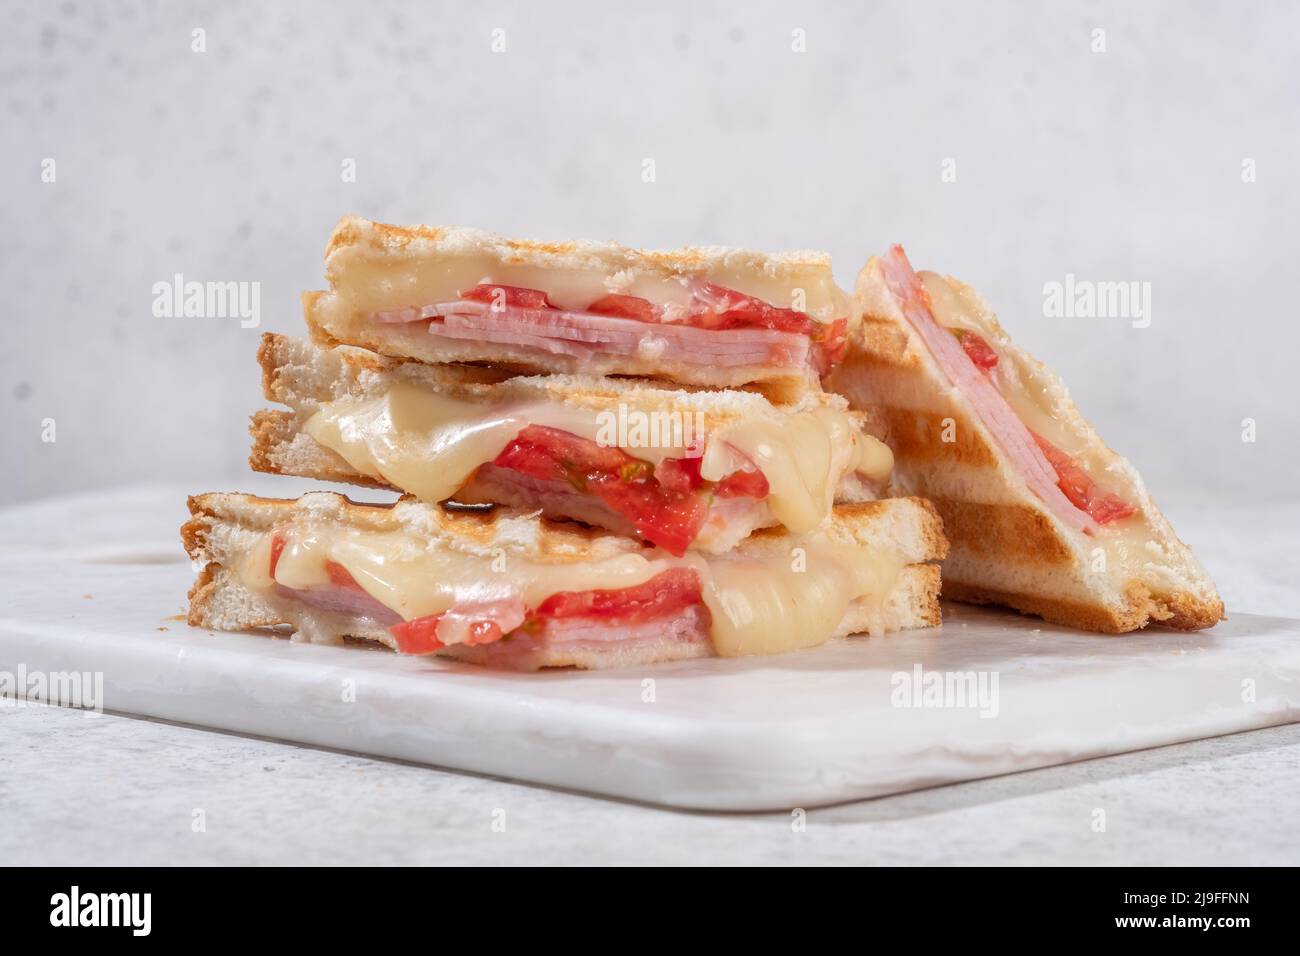 grilled ham, cheese and tomato sandwich Stock Photo